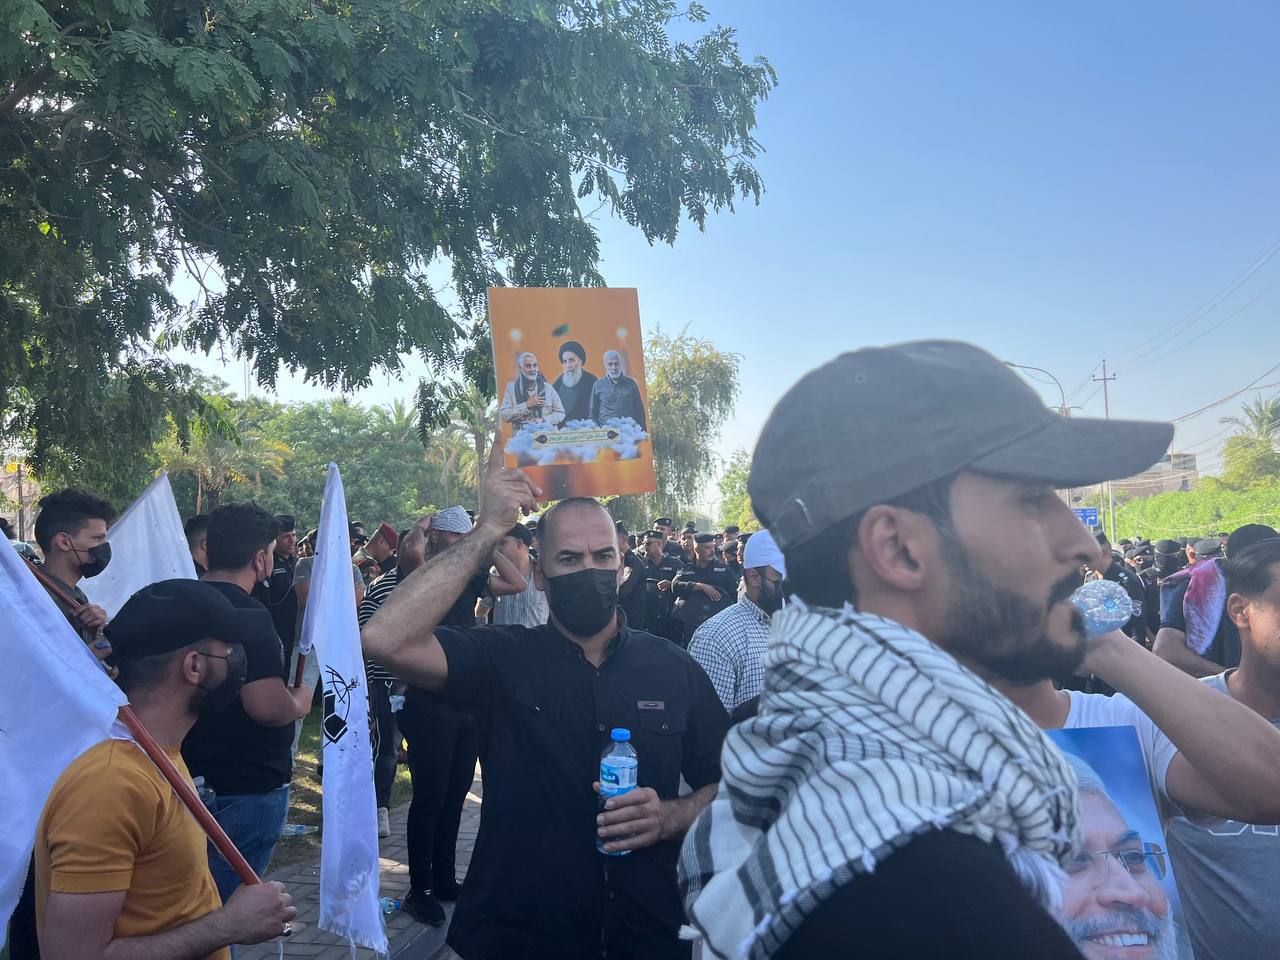 Protesters in Baghdad Decry US Interference, Express Anger over Alleged Threats to Shiite Leaders